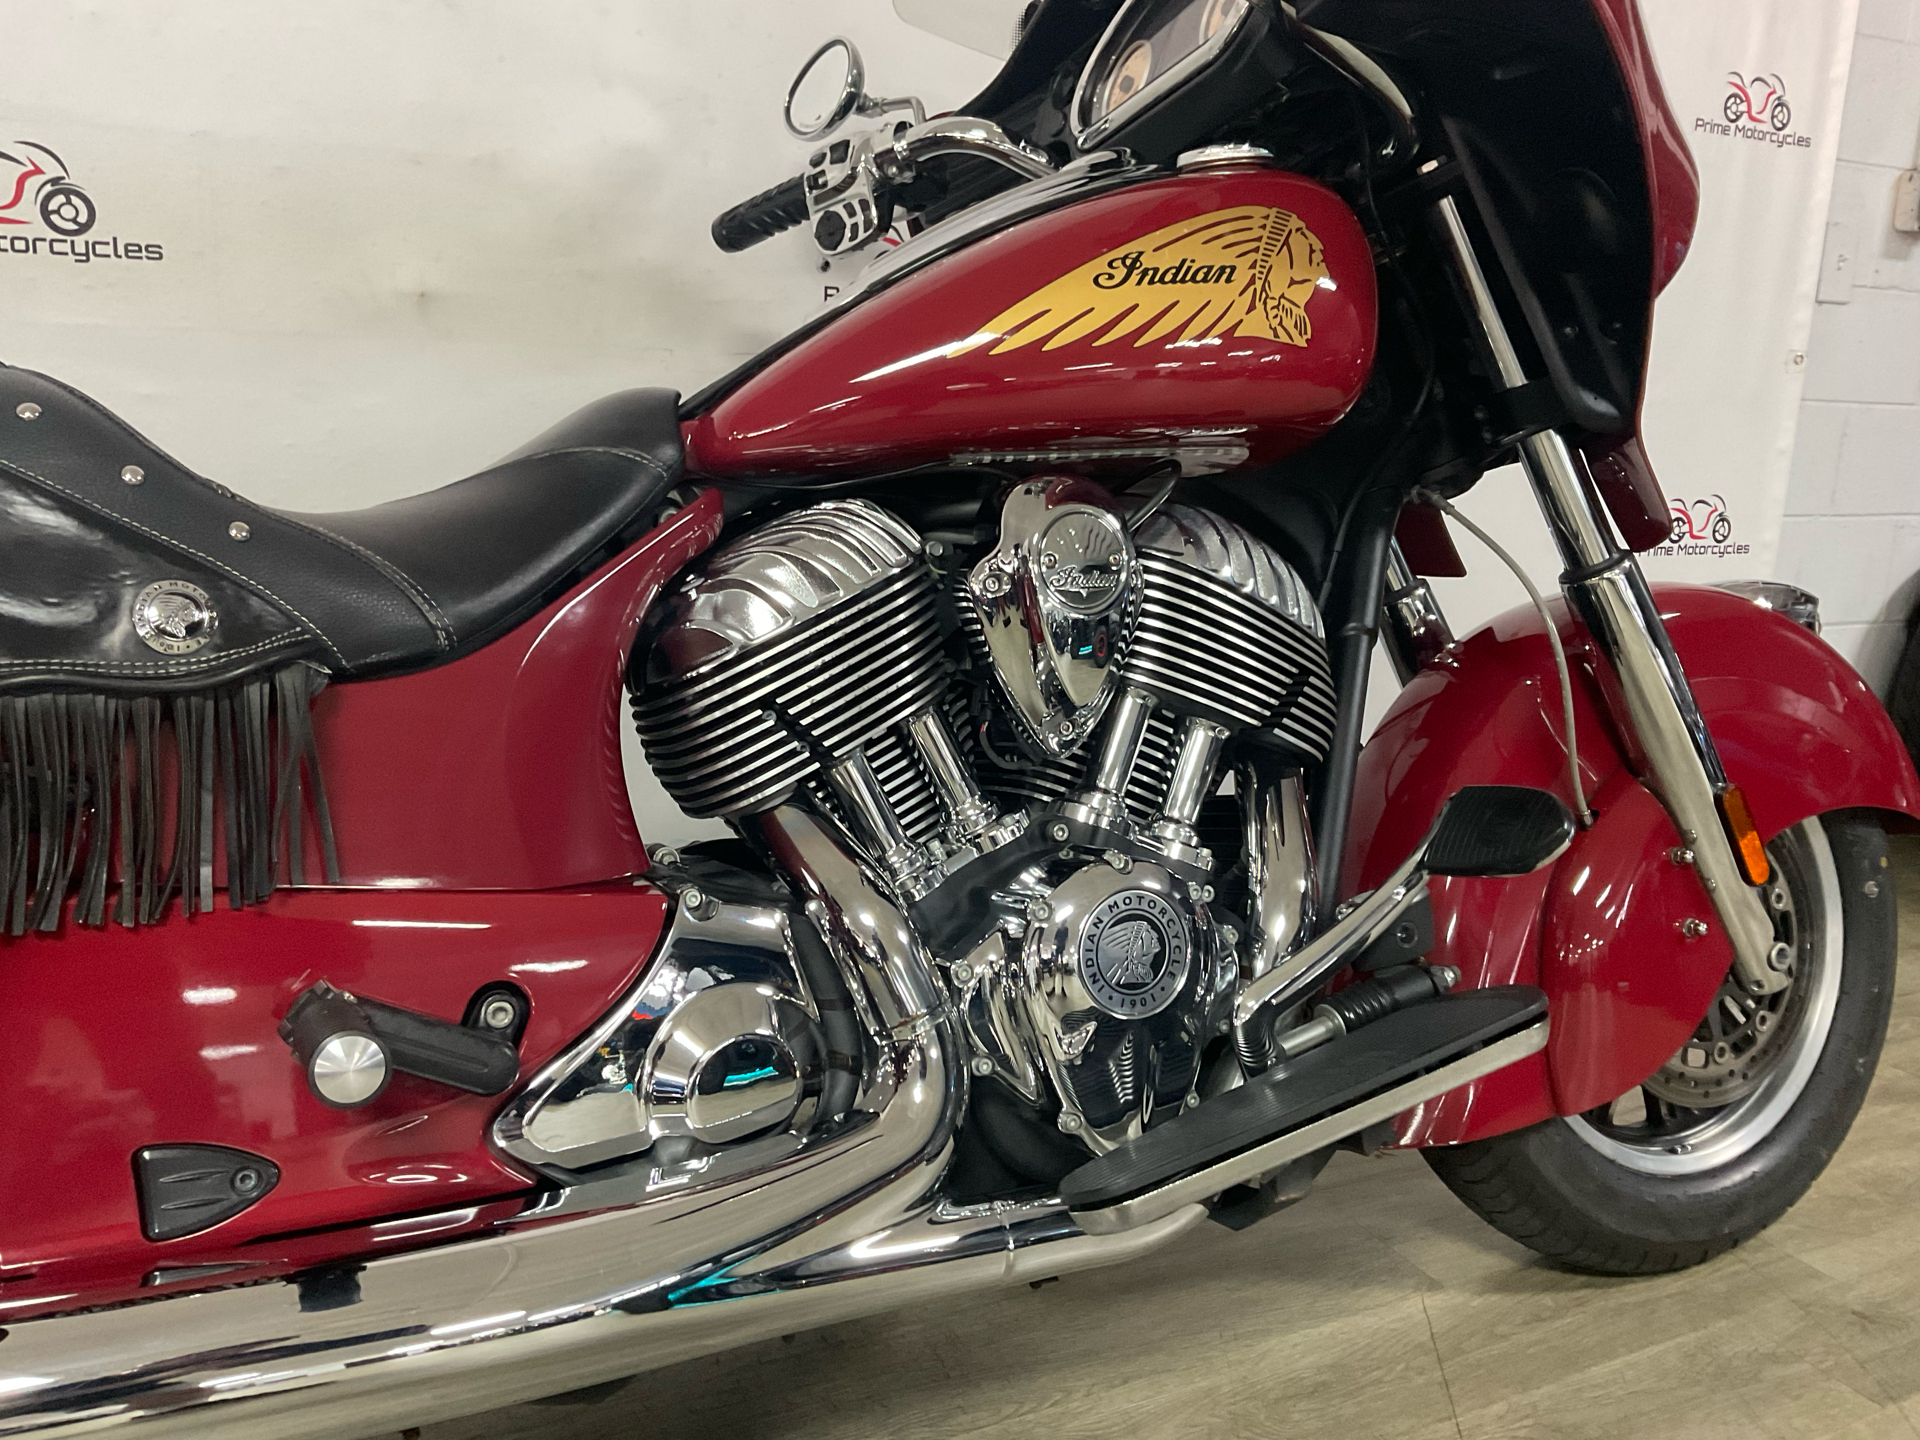 2014 Indian Motorcycle Chieftain™ in Sanford, Florida - Photo 19